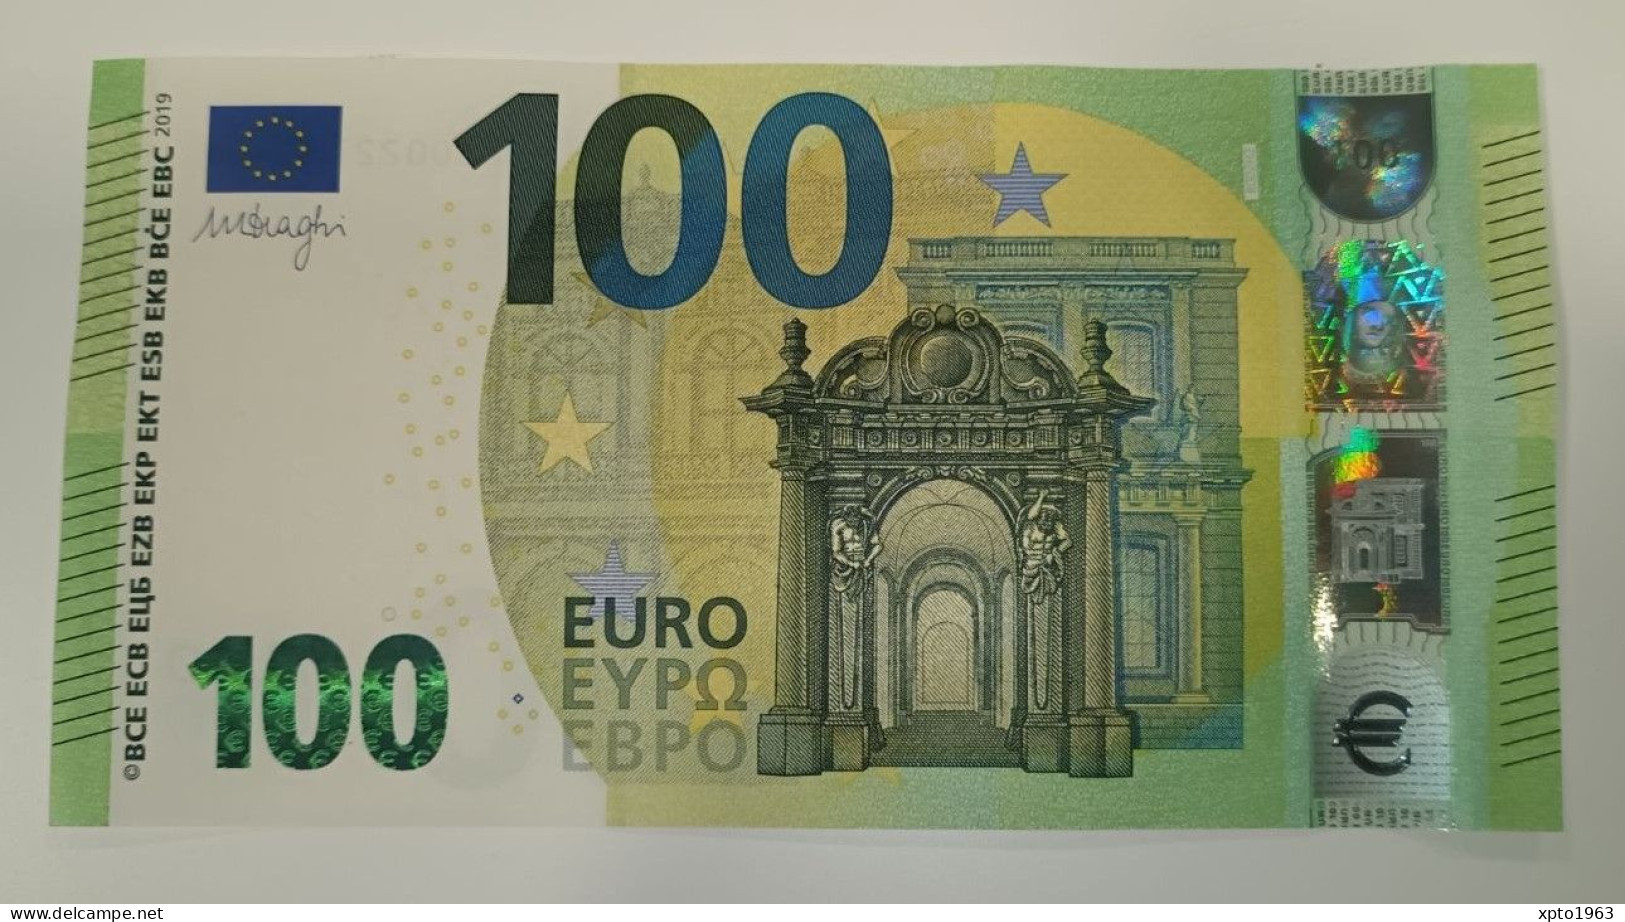 100 Euro GERMANY R002 H2 - Serial Number RB0022735436 - UNC NEUF FDS - 100 Euro